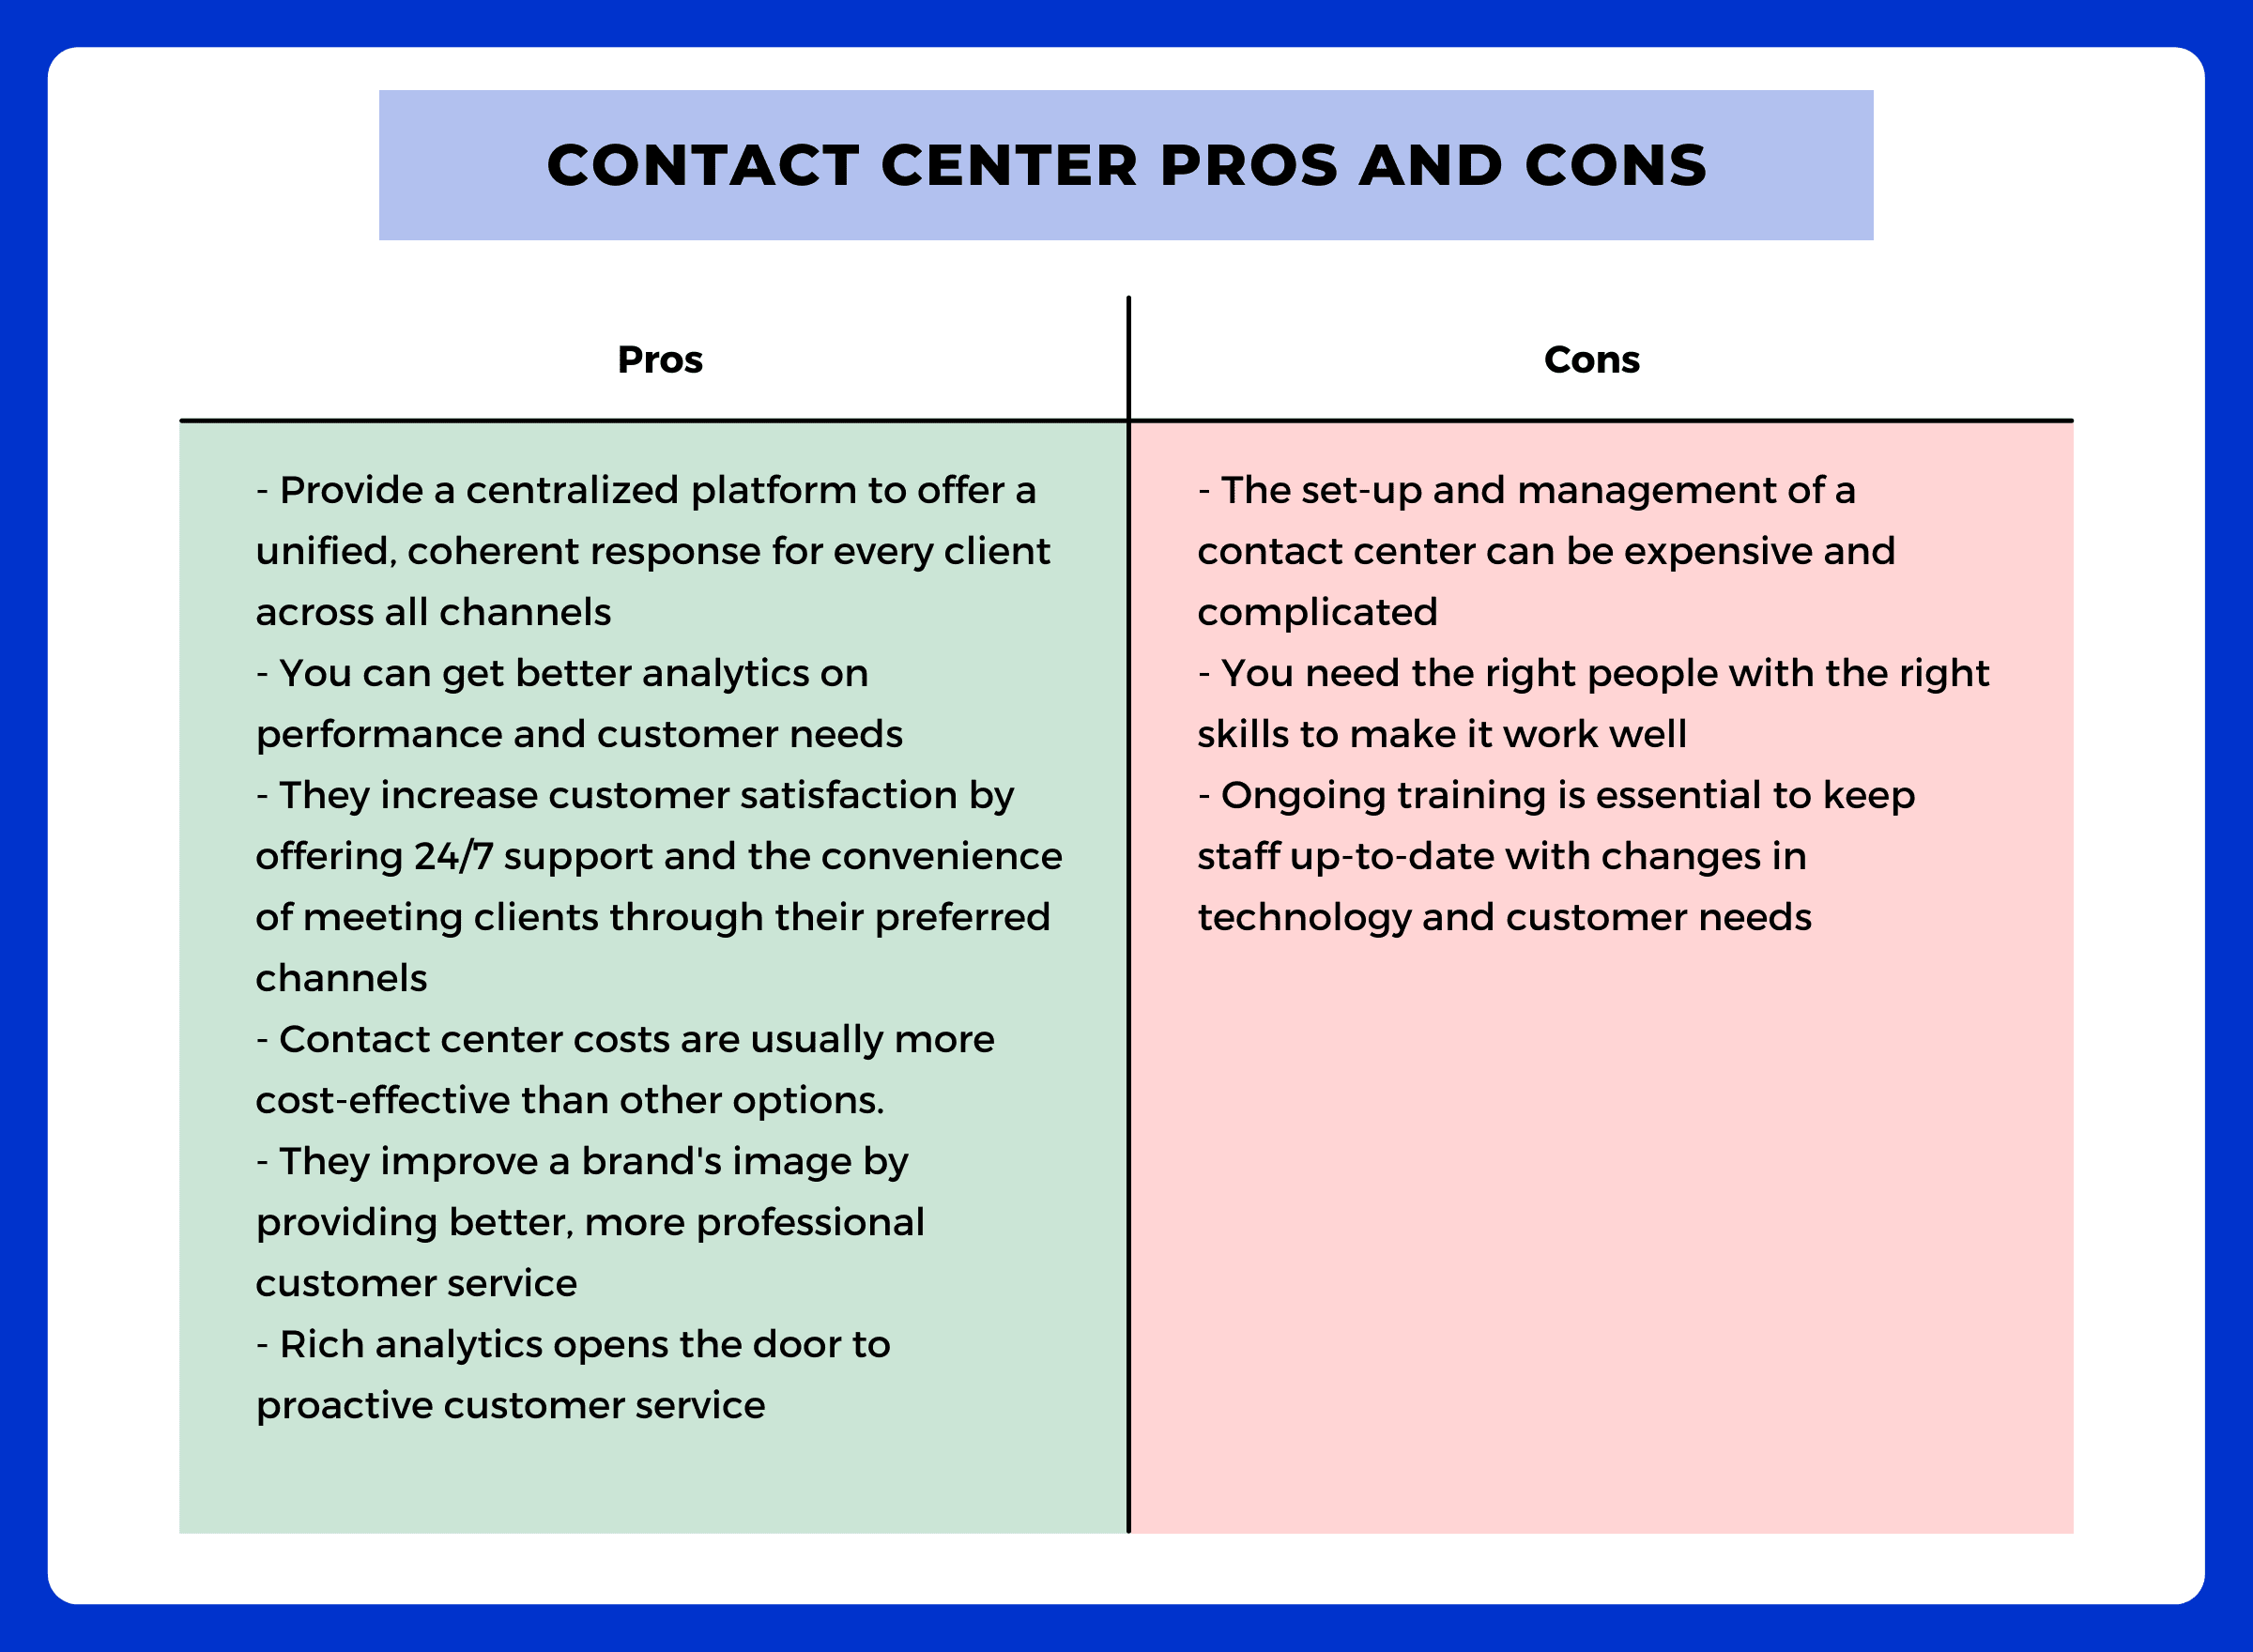 The pros and cons of a contact center